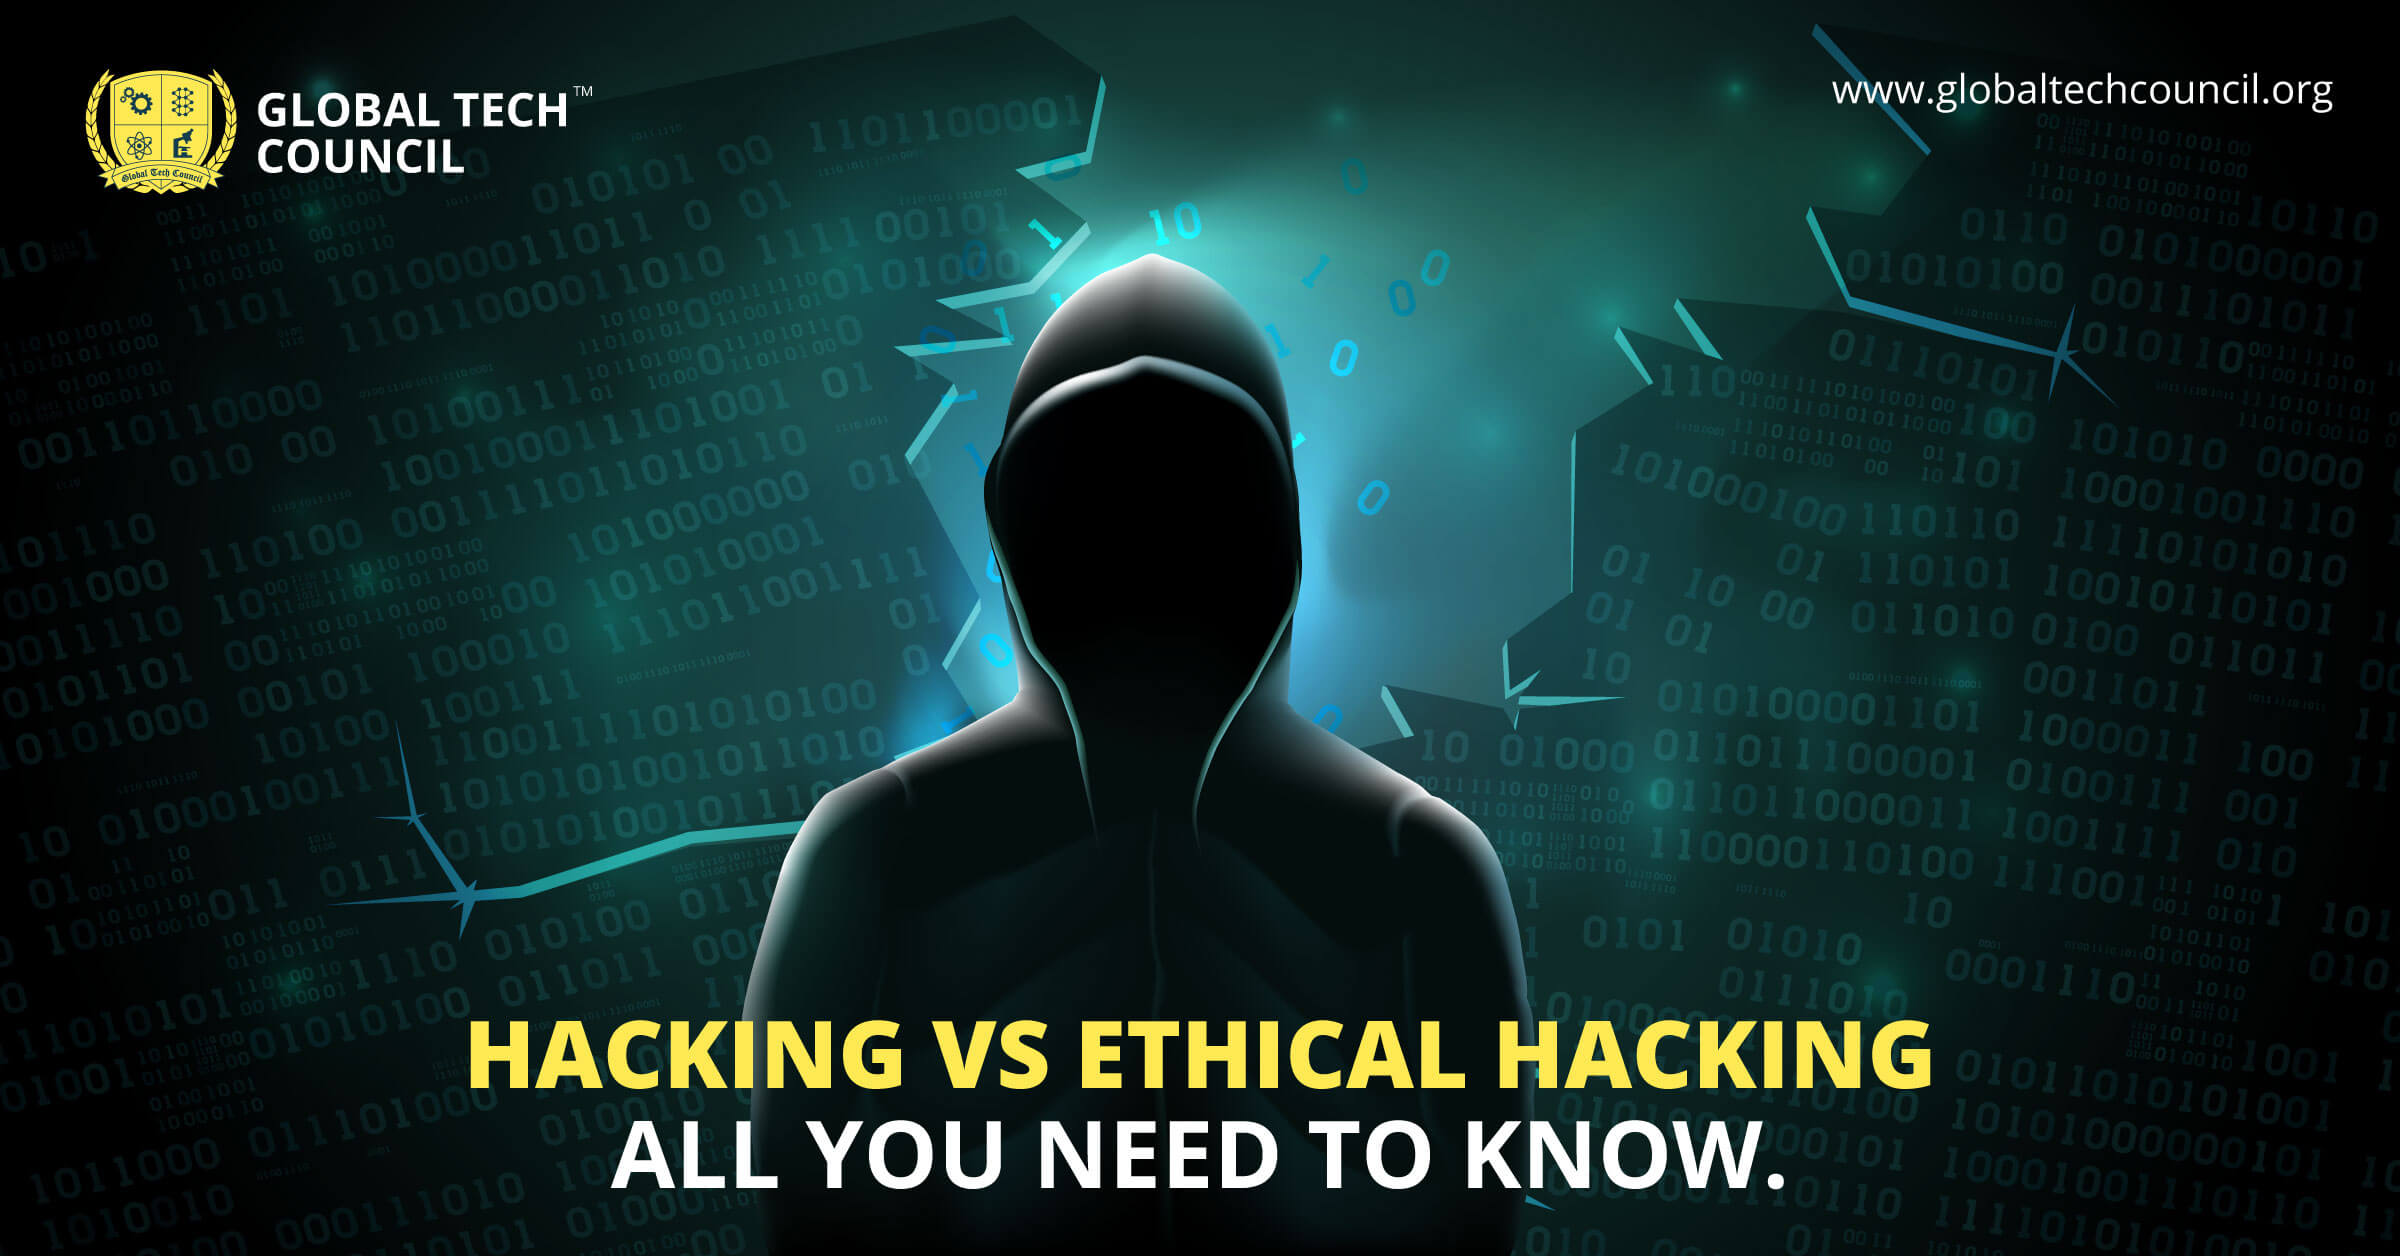 is hacking an ethical issue